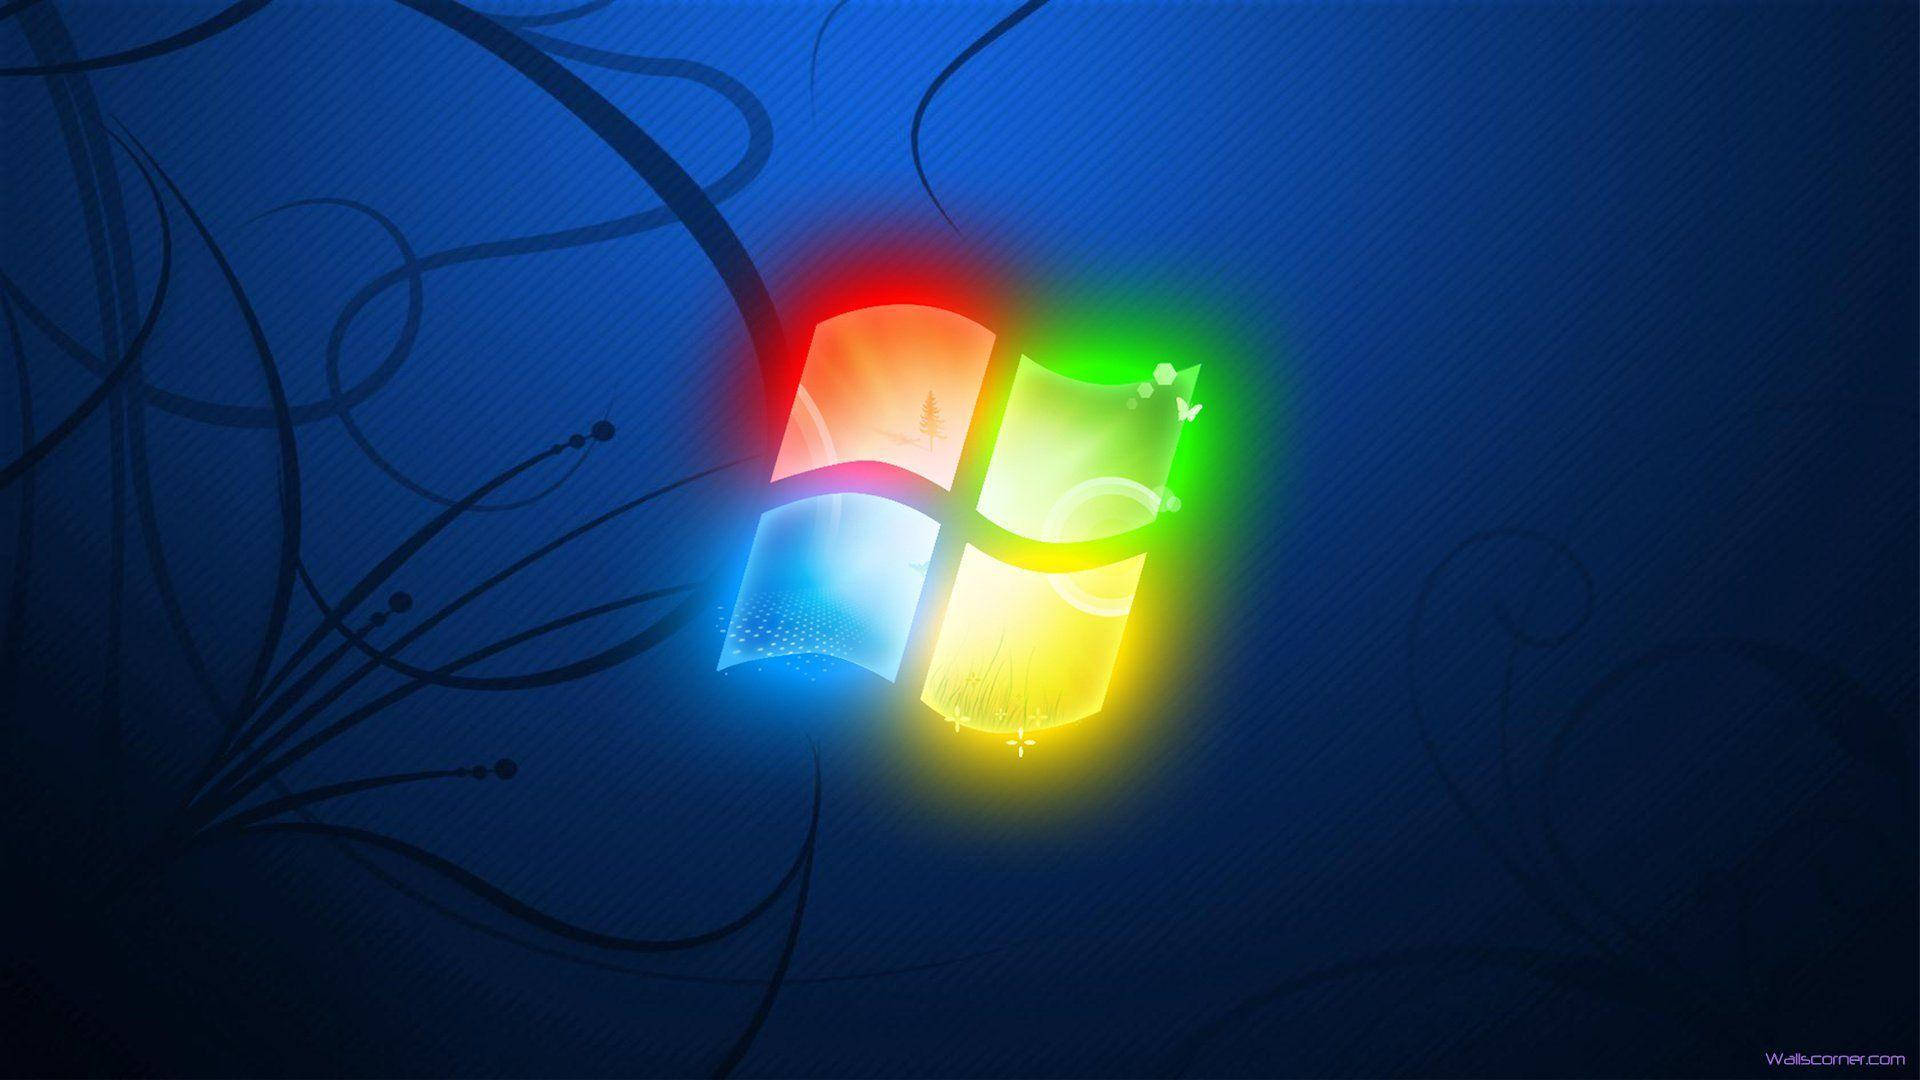 Windows 7 1920X1080 Wallpaper and Background Image